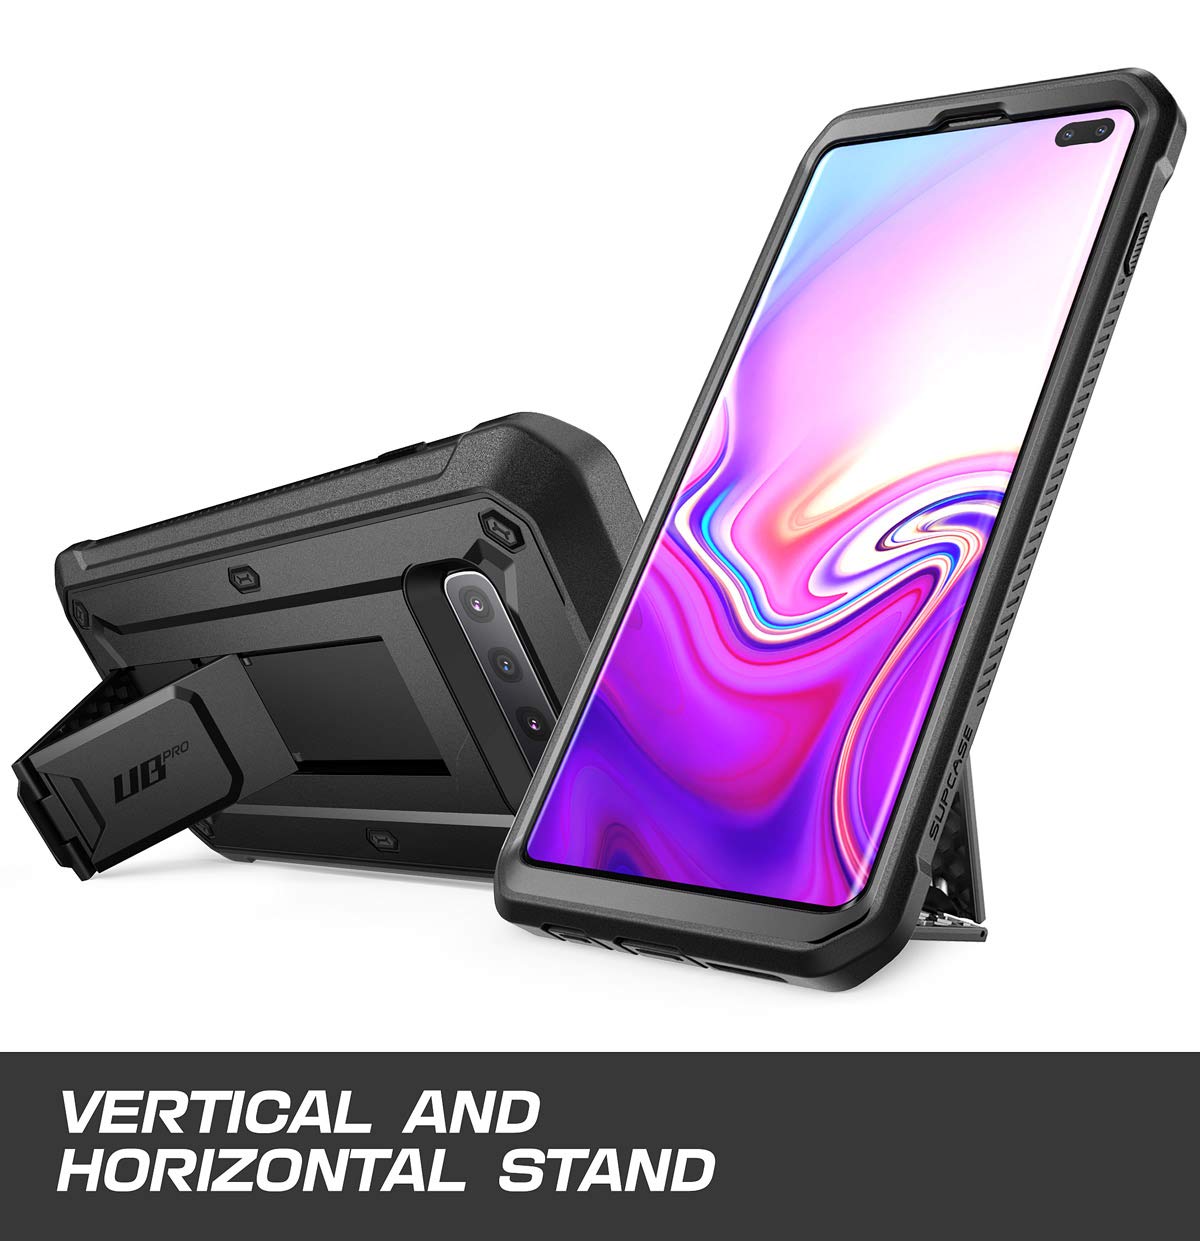 SUPCASE Unicorn Beetle Pro Series Designed for Samsung Galaxy S10 Plus Case (2019 Release) Full-Body Dual Layer Rugged with Holster & Kickstand Without Built-in Screen Protector (Black)